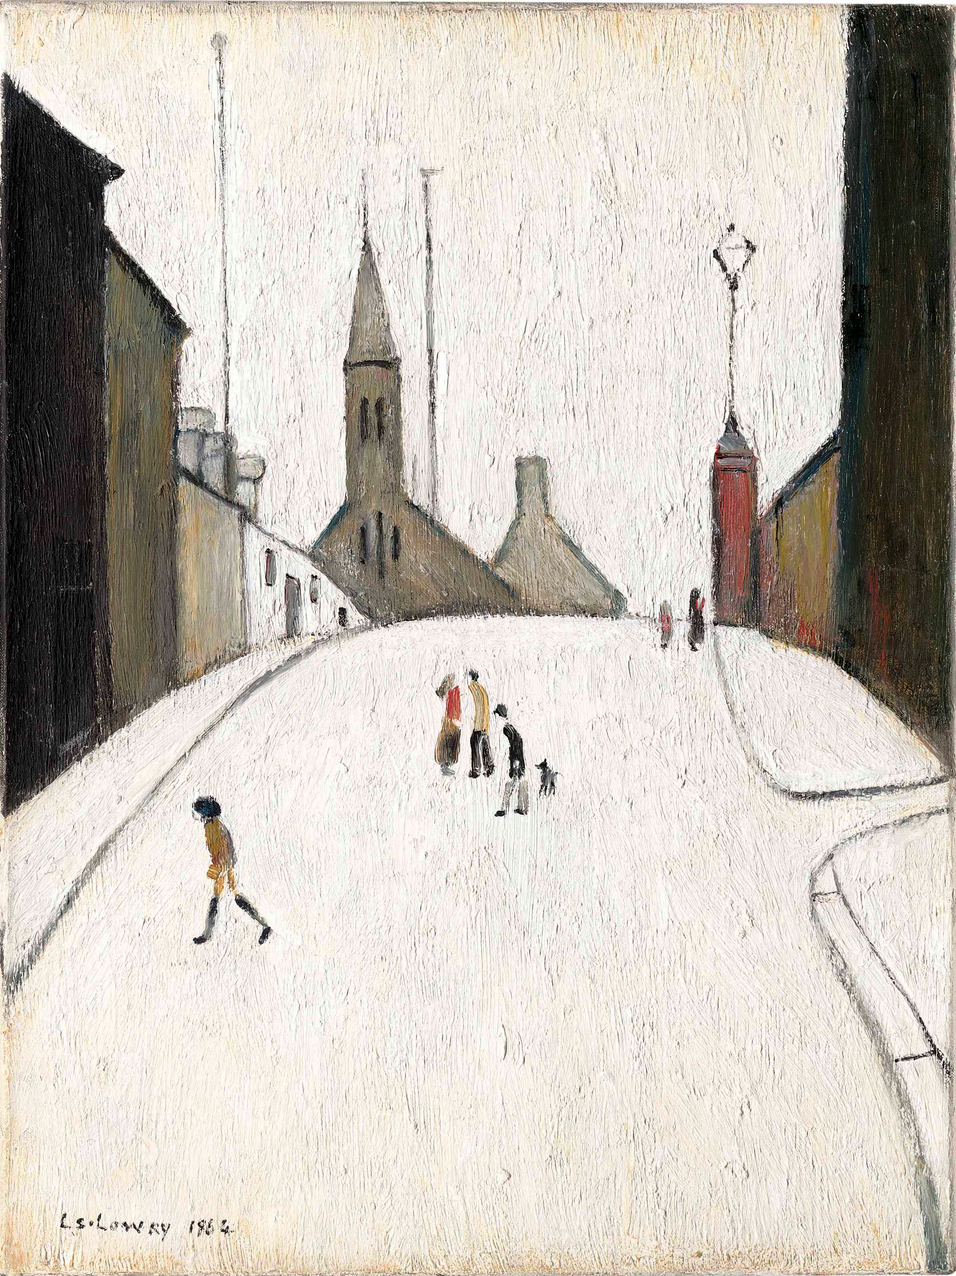 Church Street, Clitheroe (1964) by Laurence Stephen Lowry (1887 - 1976), English artist.